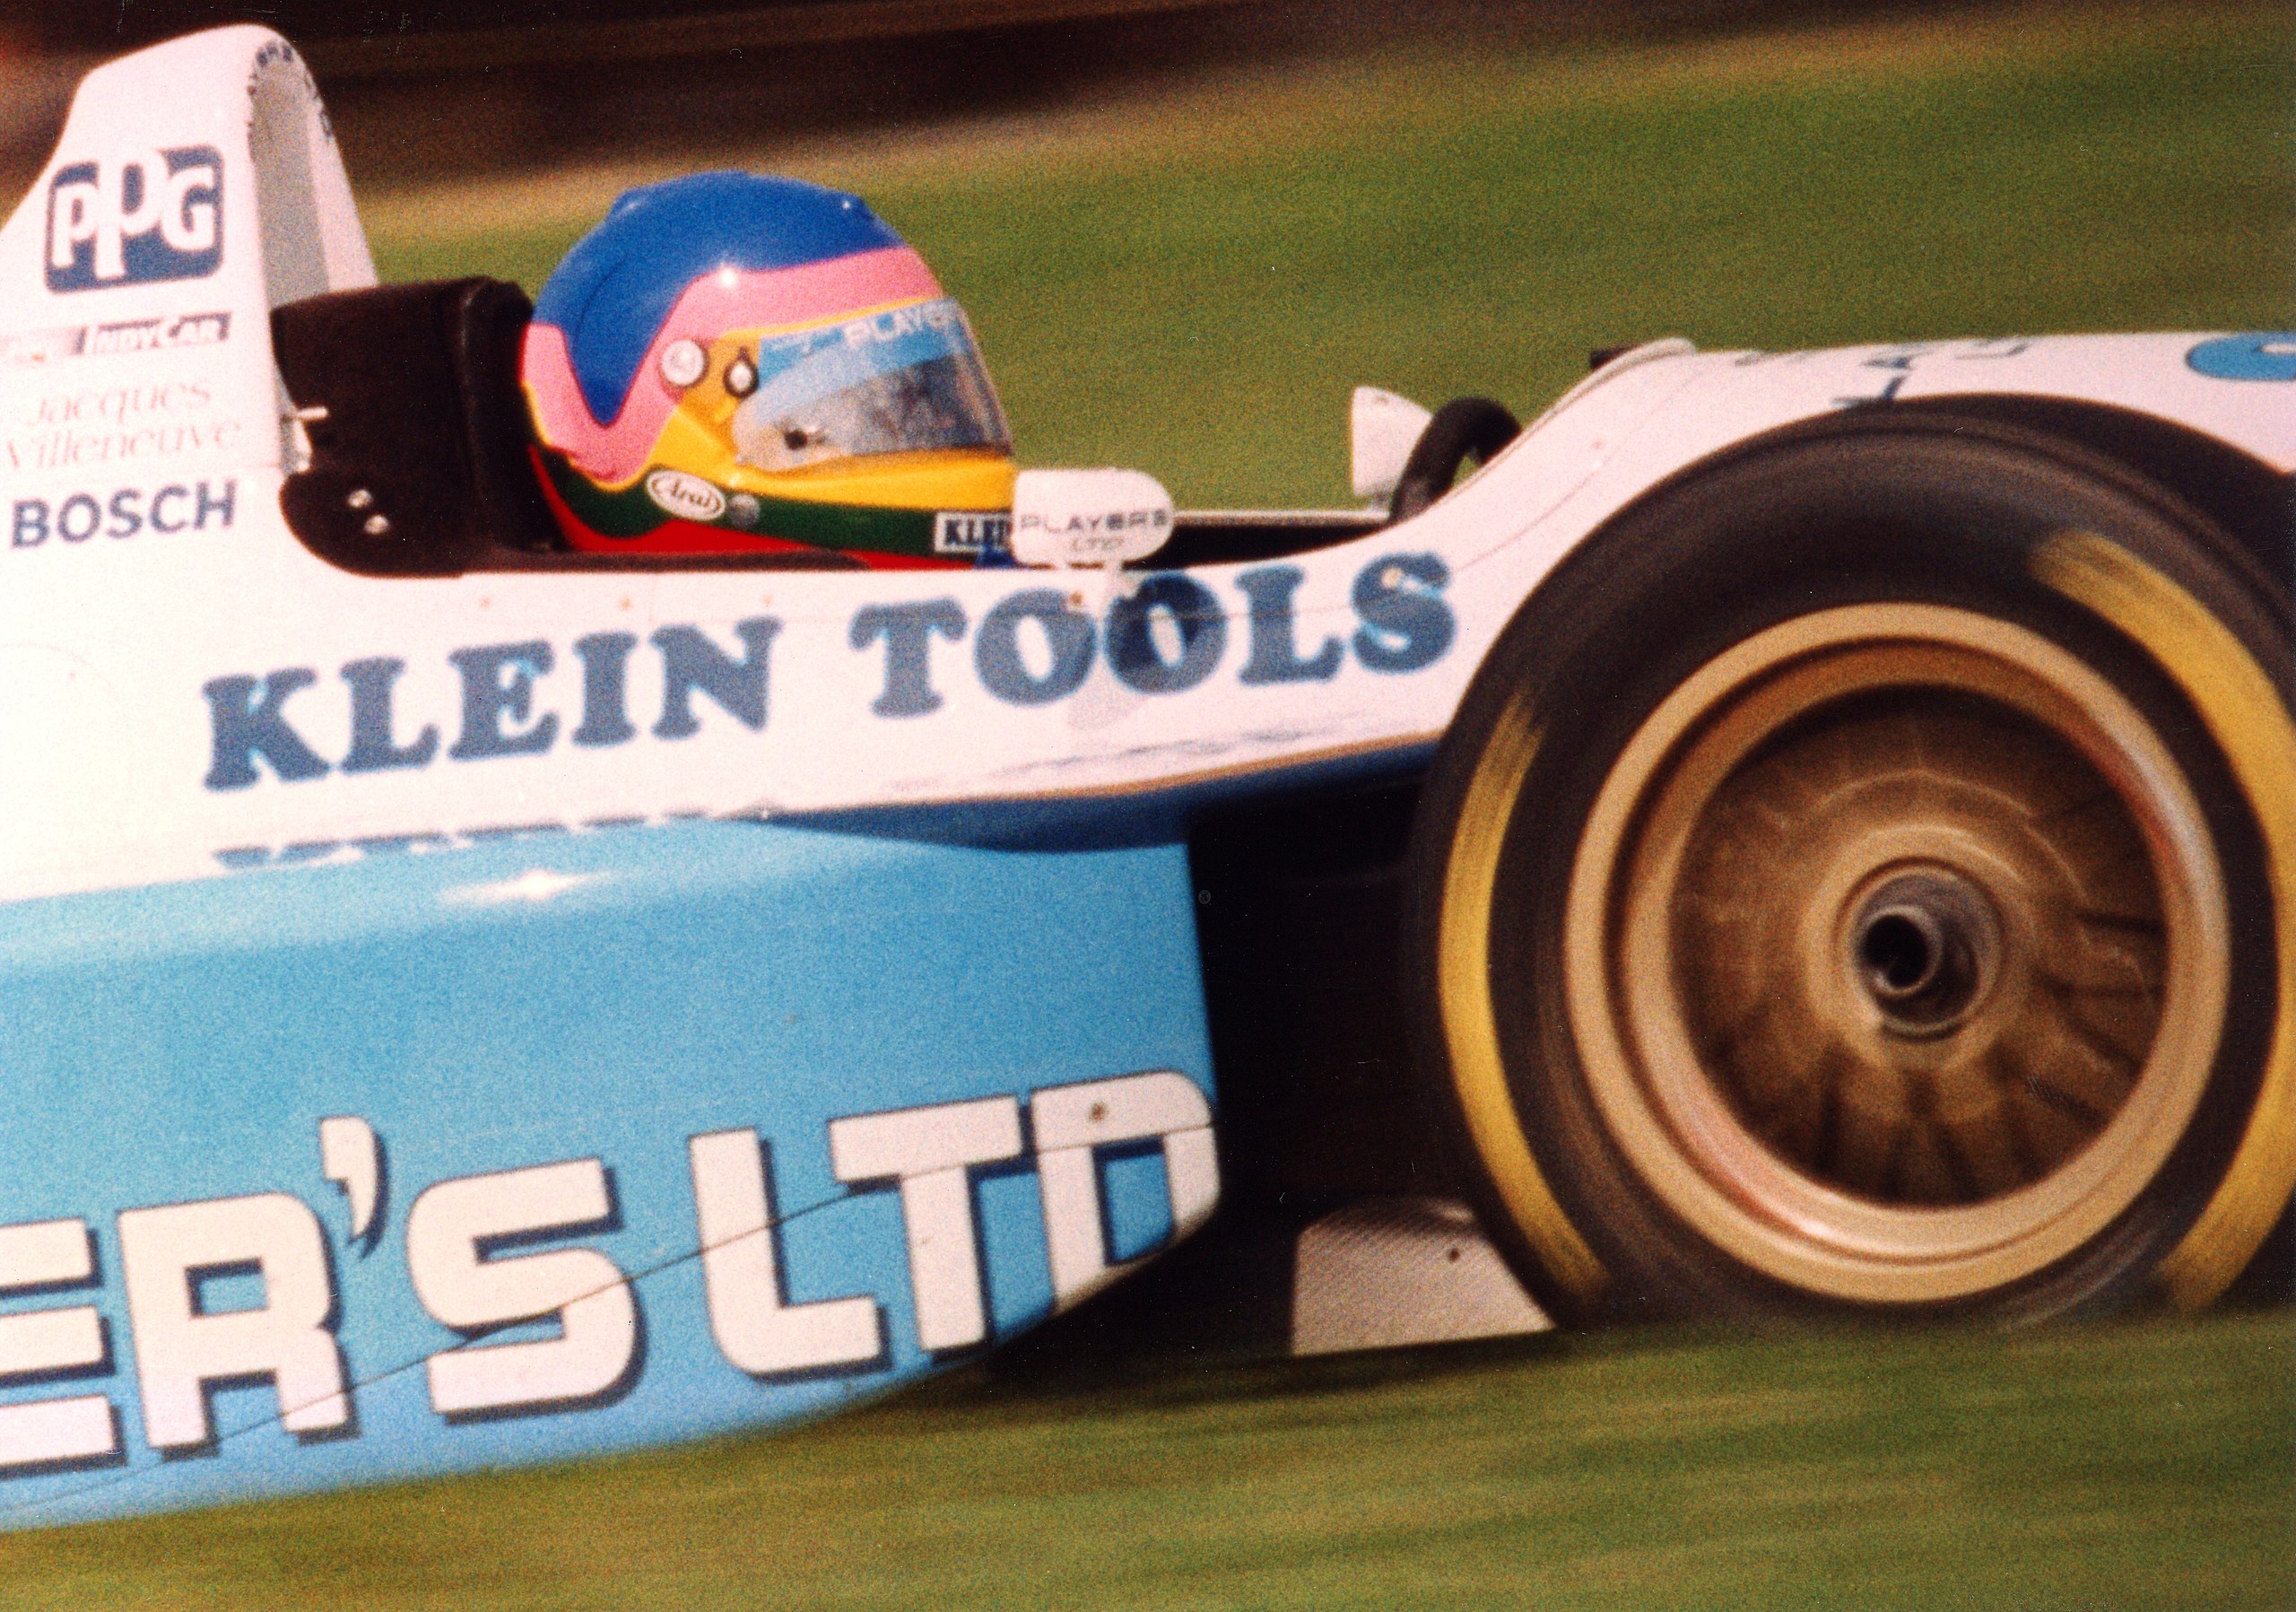 Villeneuve racing in the 1995 PPG IndyCar World Series at Mid-Ohio Sports Car Course